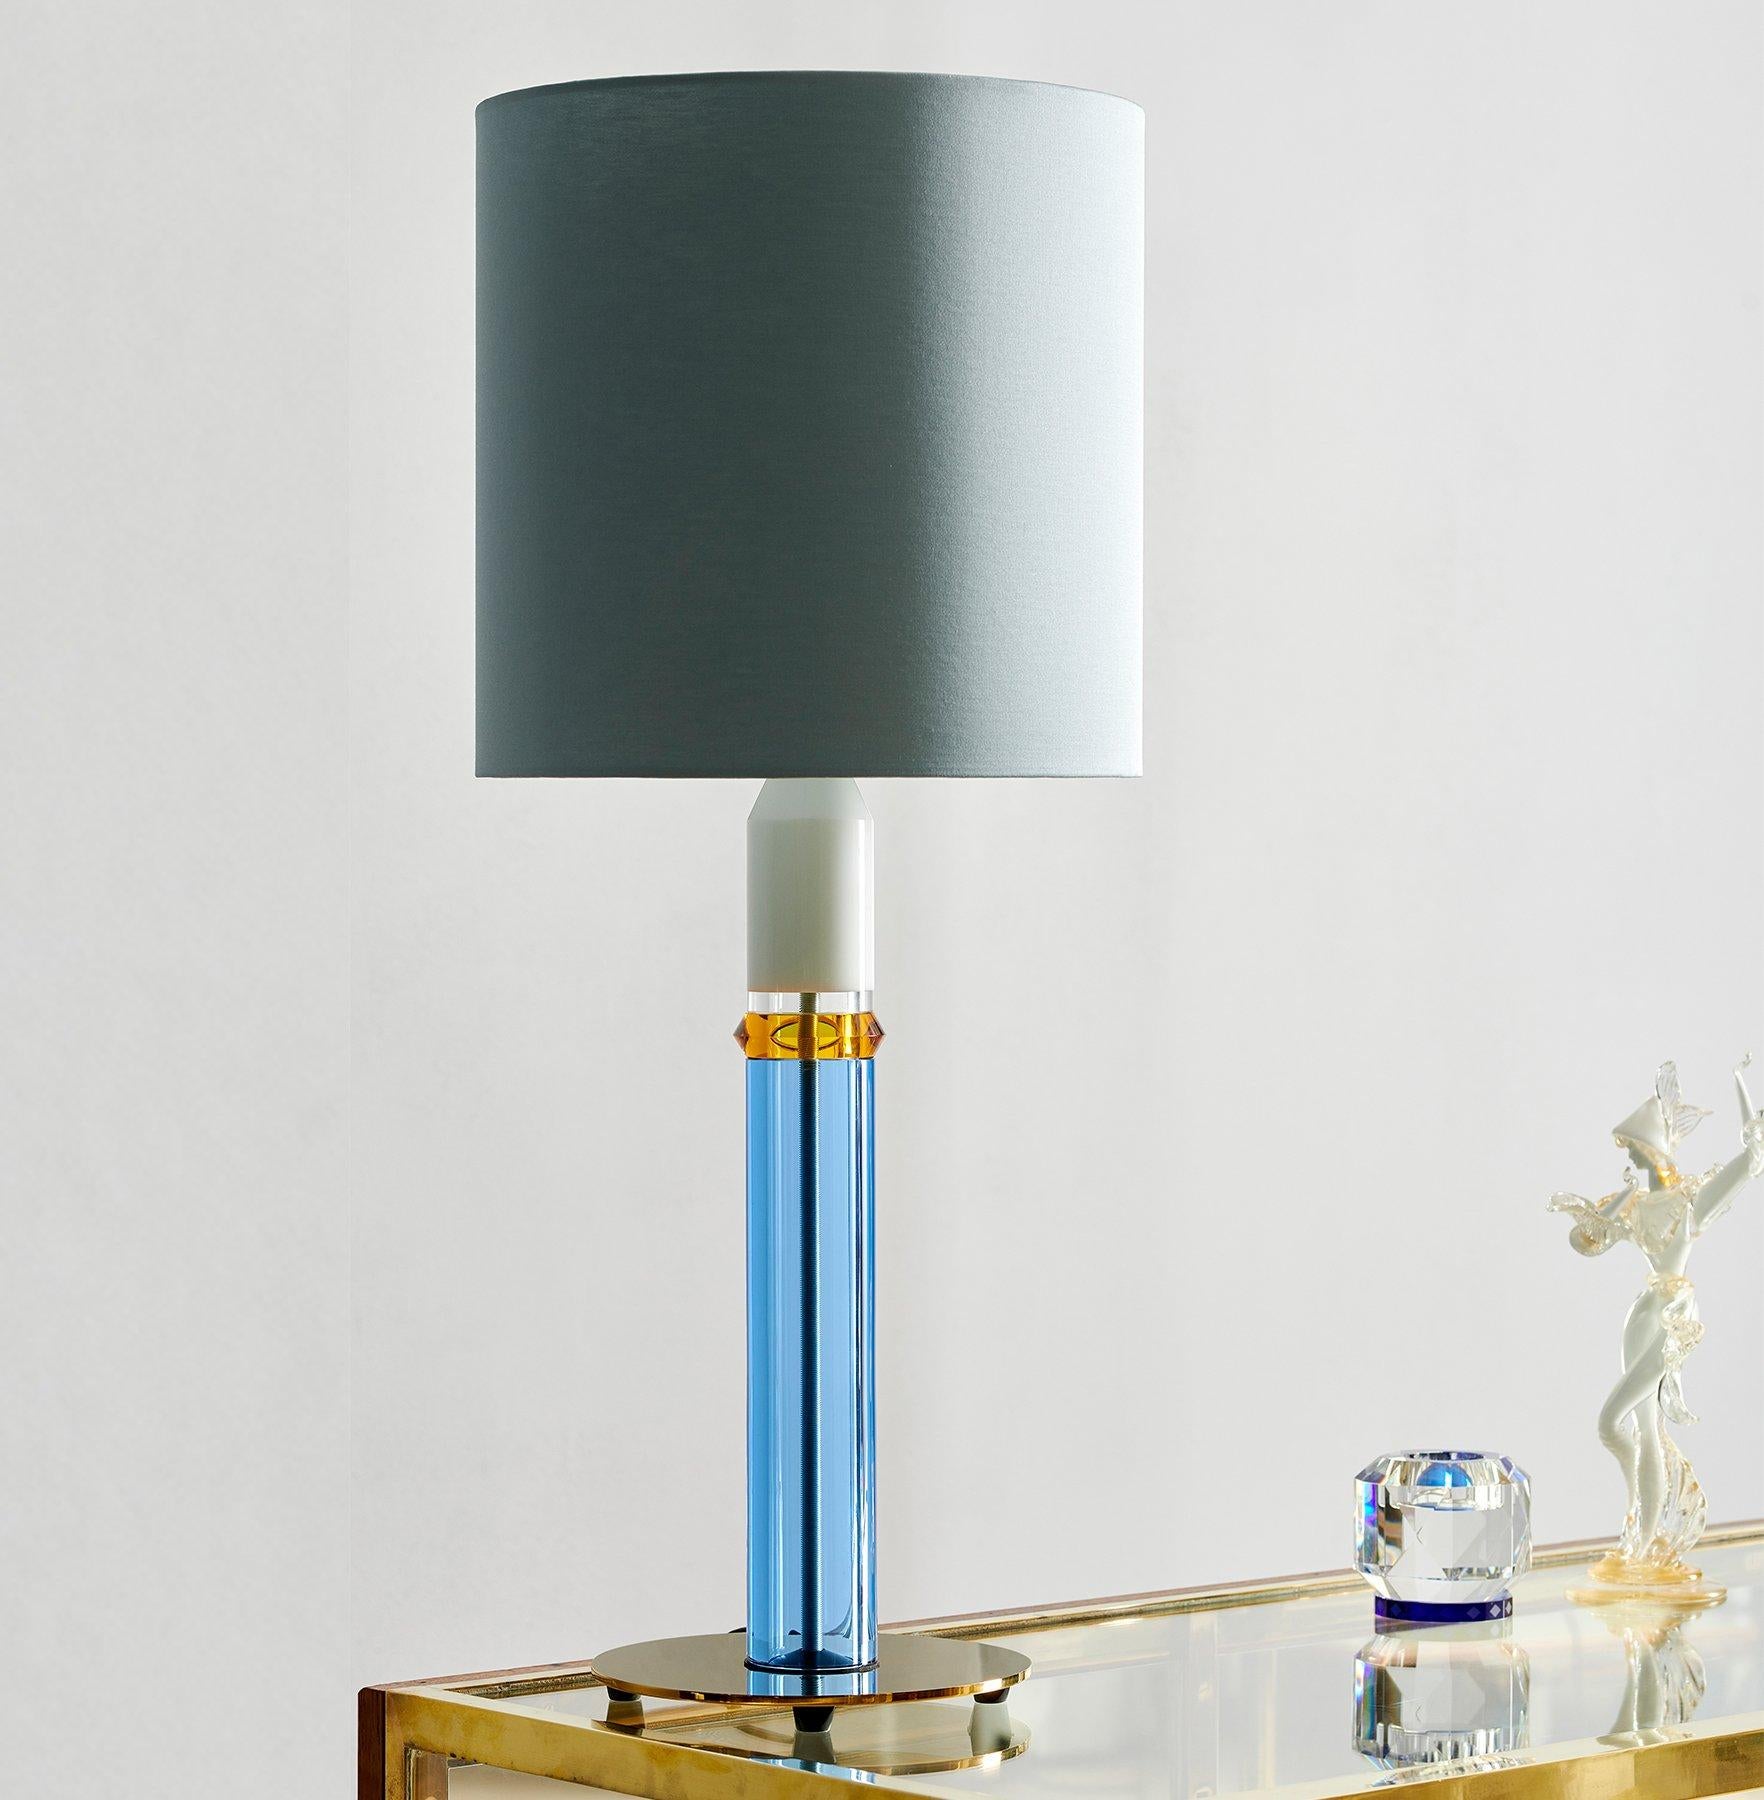 Colorful crystal table lamp, hand-sculpted contemporary crystal
Hand-sculpted in crystal
Measures: Height 72 cm
Width 30 cm
Weight: 3.5 kg
Material: Fine hand cut crystal and brass coated iron

With blasting colour combinations, a brave